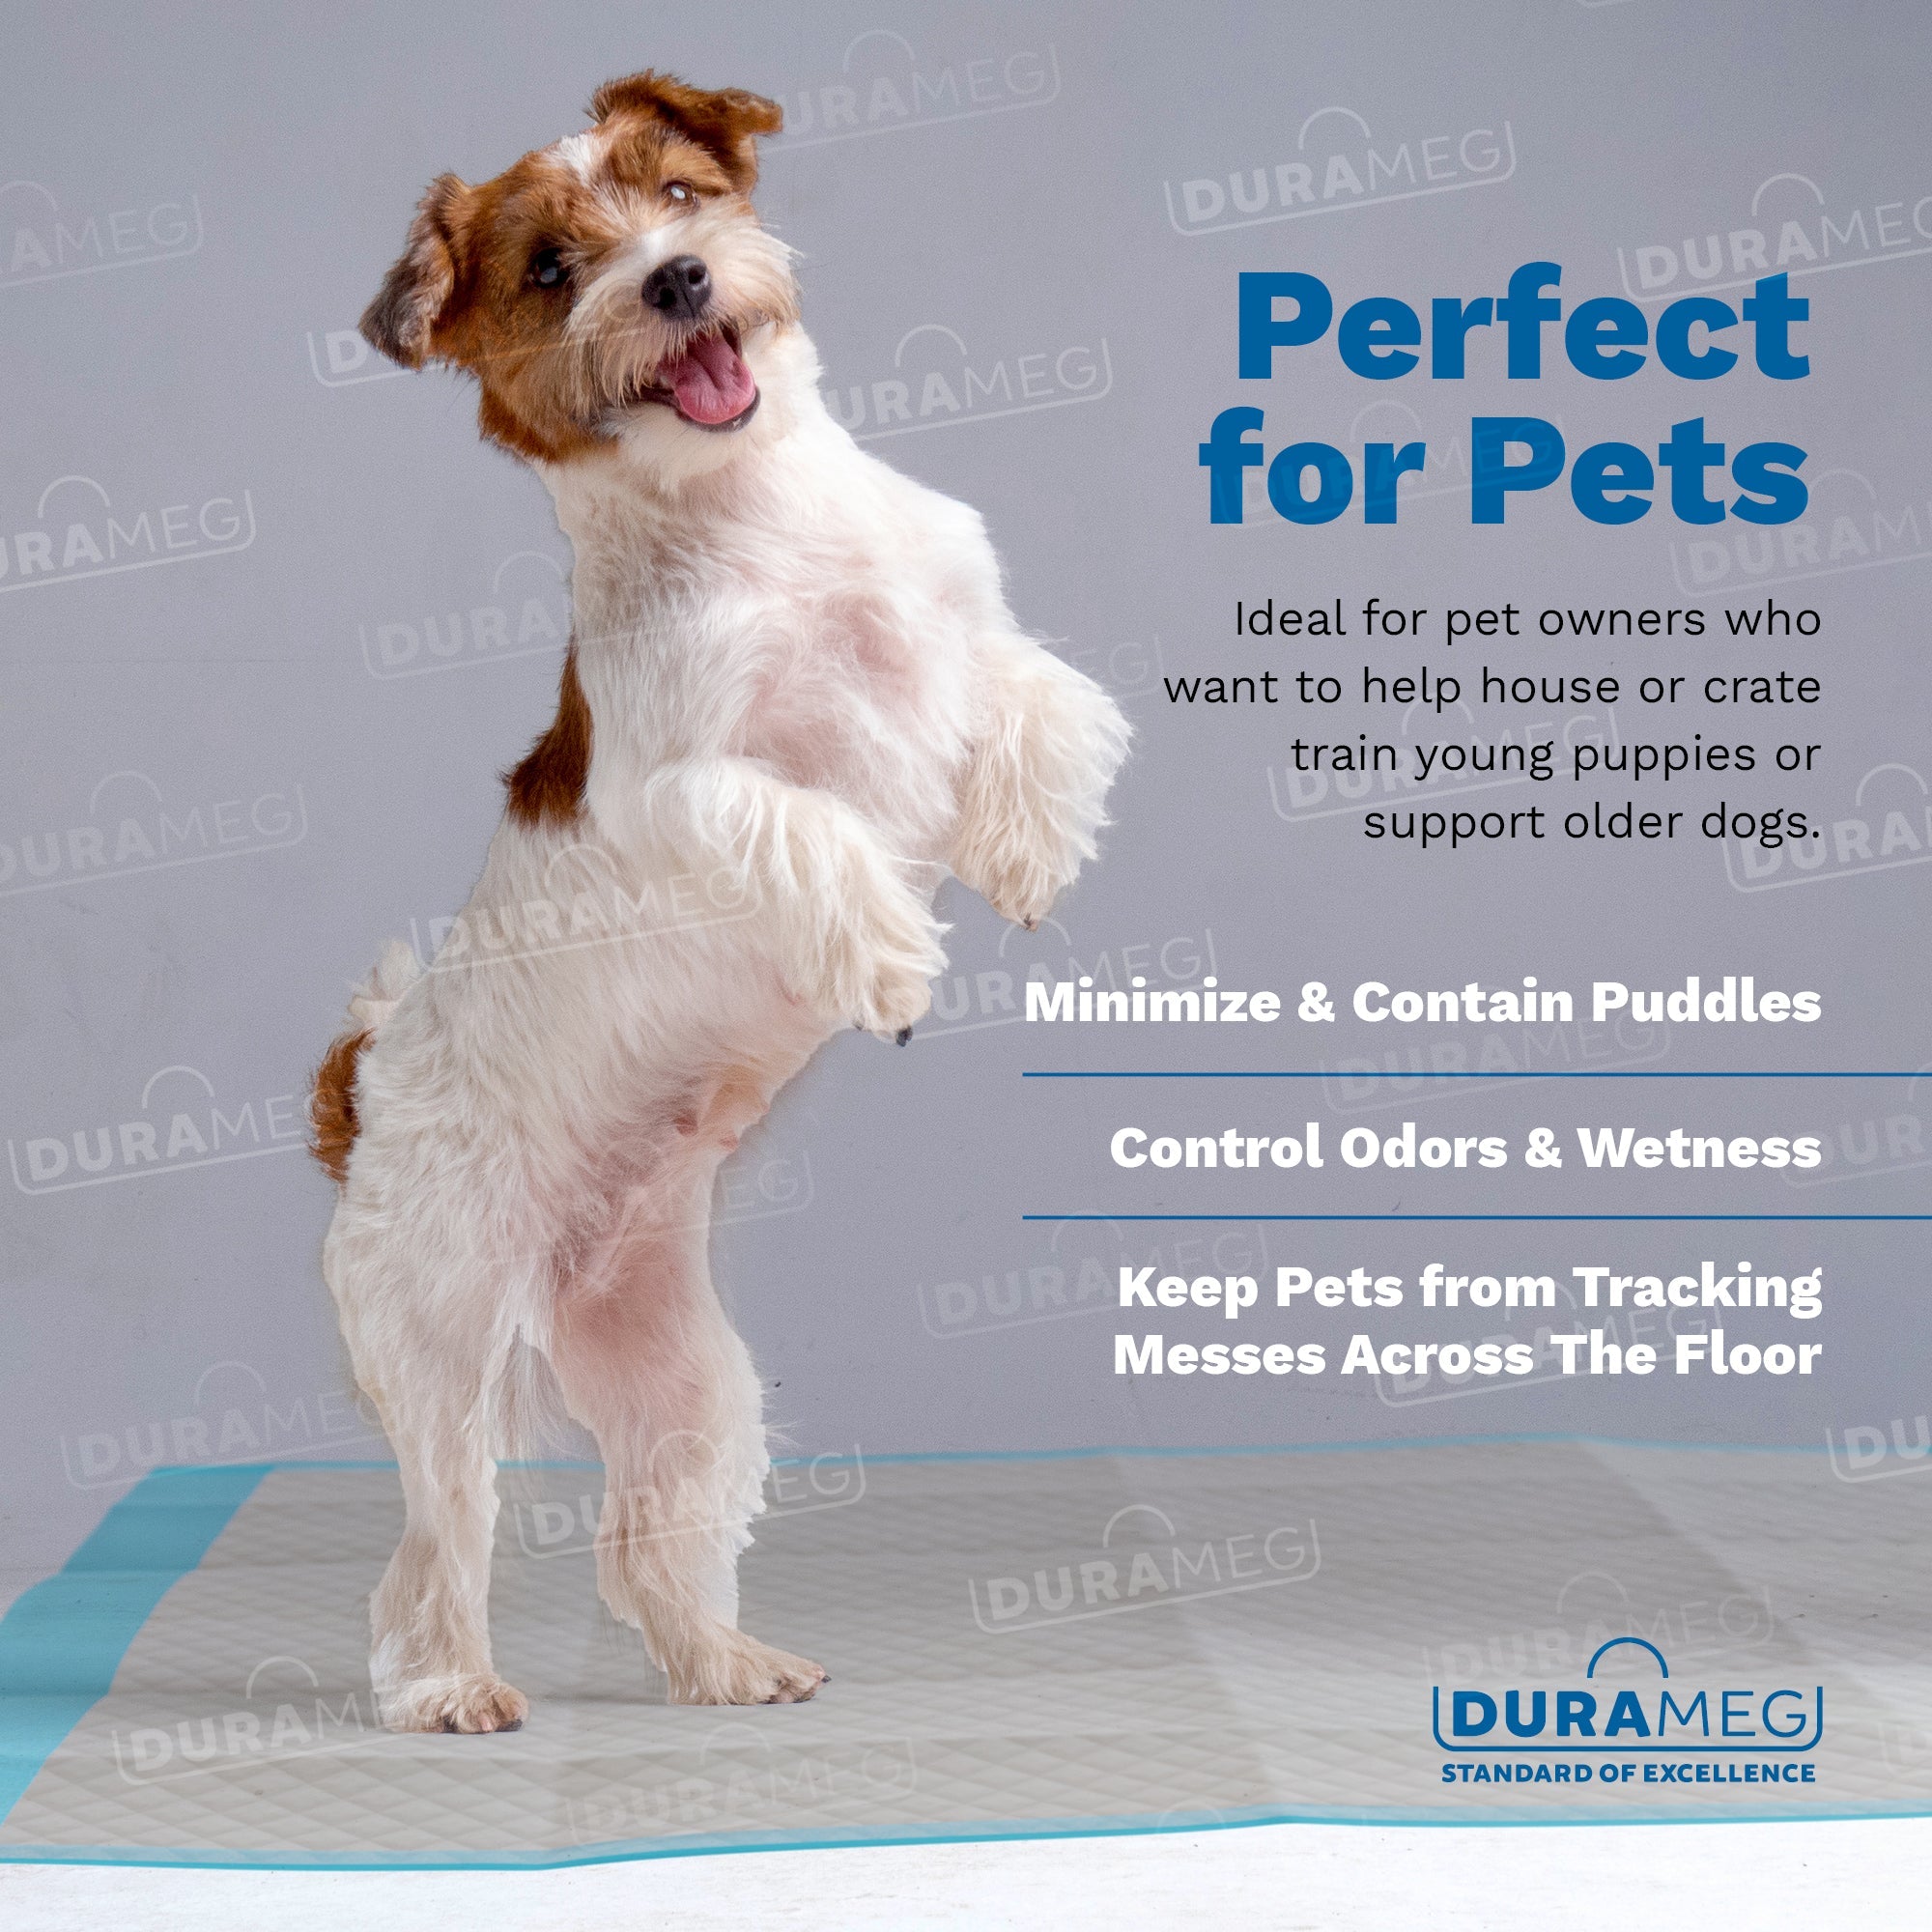 Perfects for pets